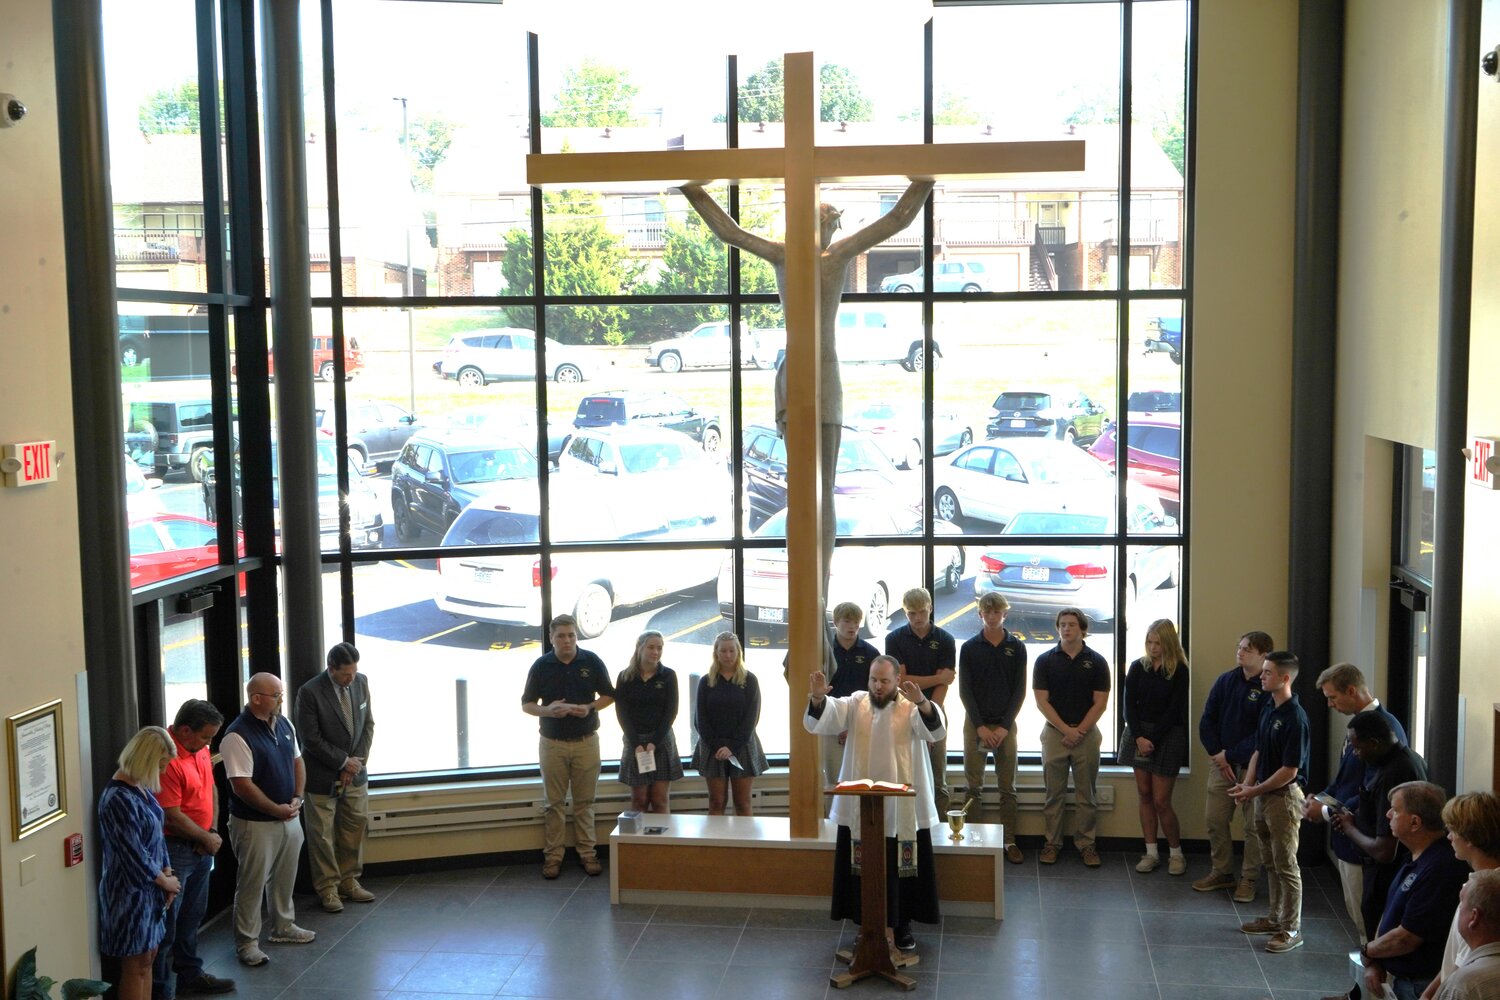 Father Paul Clark, chaplain of Helias Catholic High School in Jefferson City, blesses and rededicates the renewed “Crucifix Entrance” to the school during a Sept. 7 ceremony.